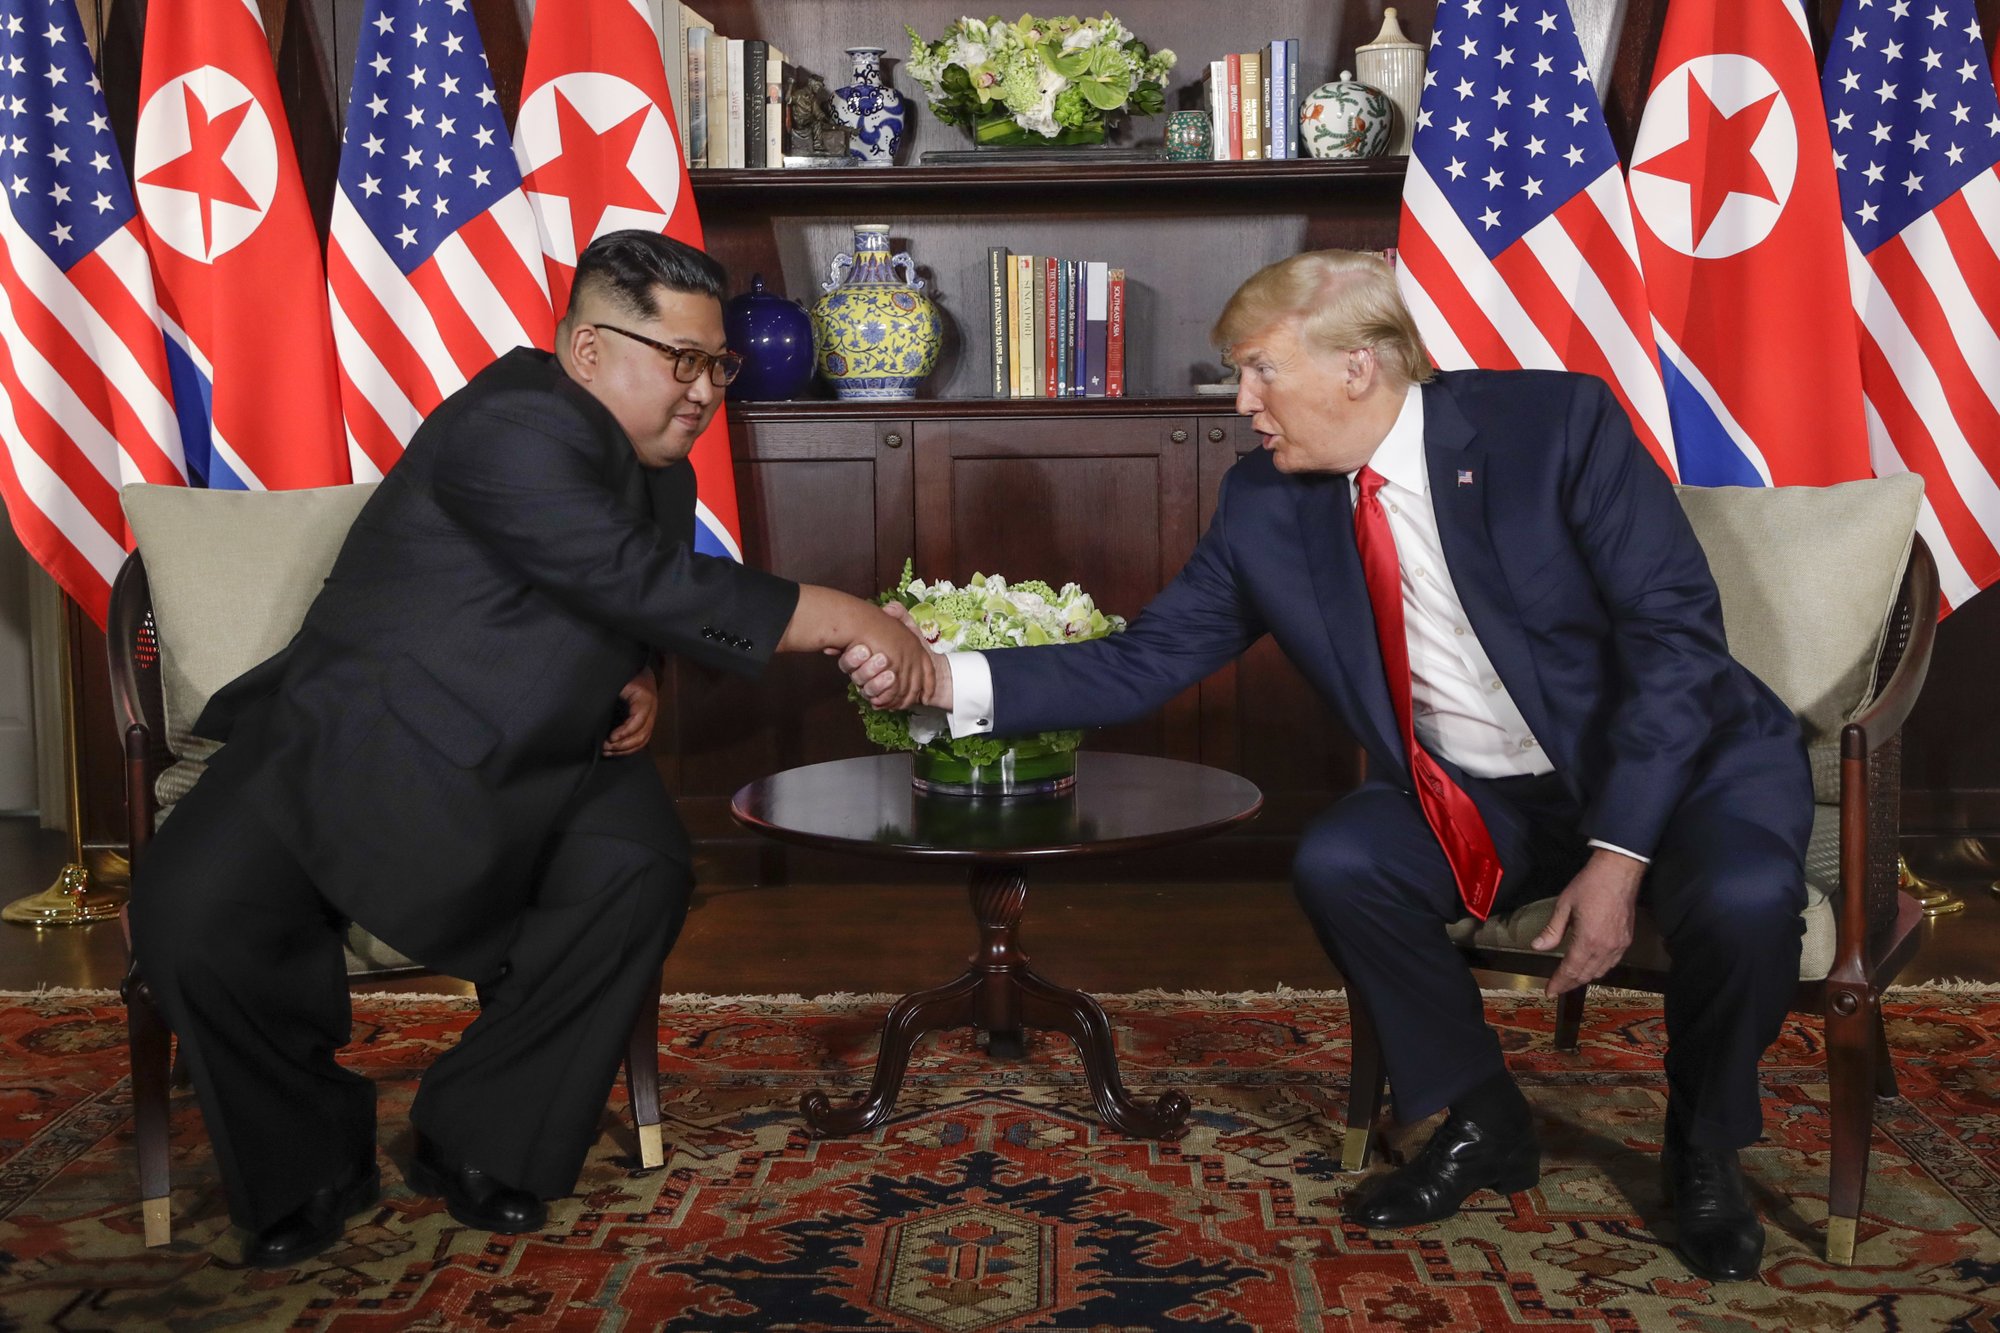 FILE - In this June 12, 2018, file photo, North Korea leader Kim Jong Un, left, and U.S. President Donald Trump shake hands during their first meeting at the Capella resort on Sentosa Island in Singapore. Photo: AP